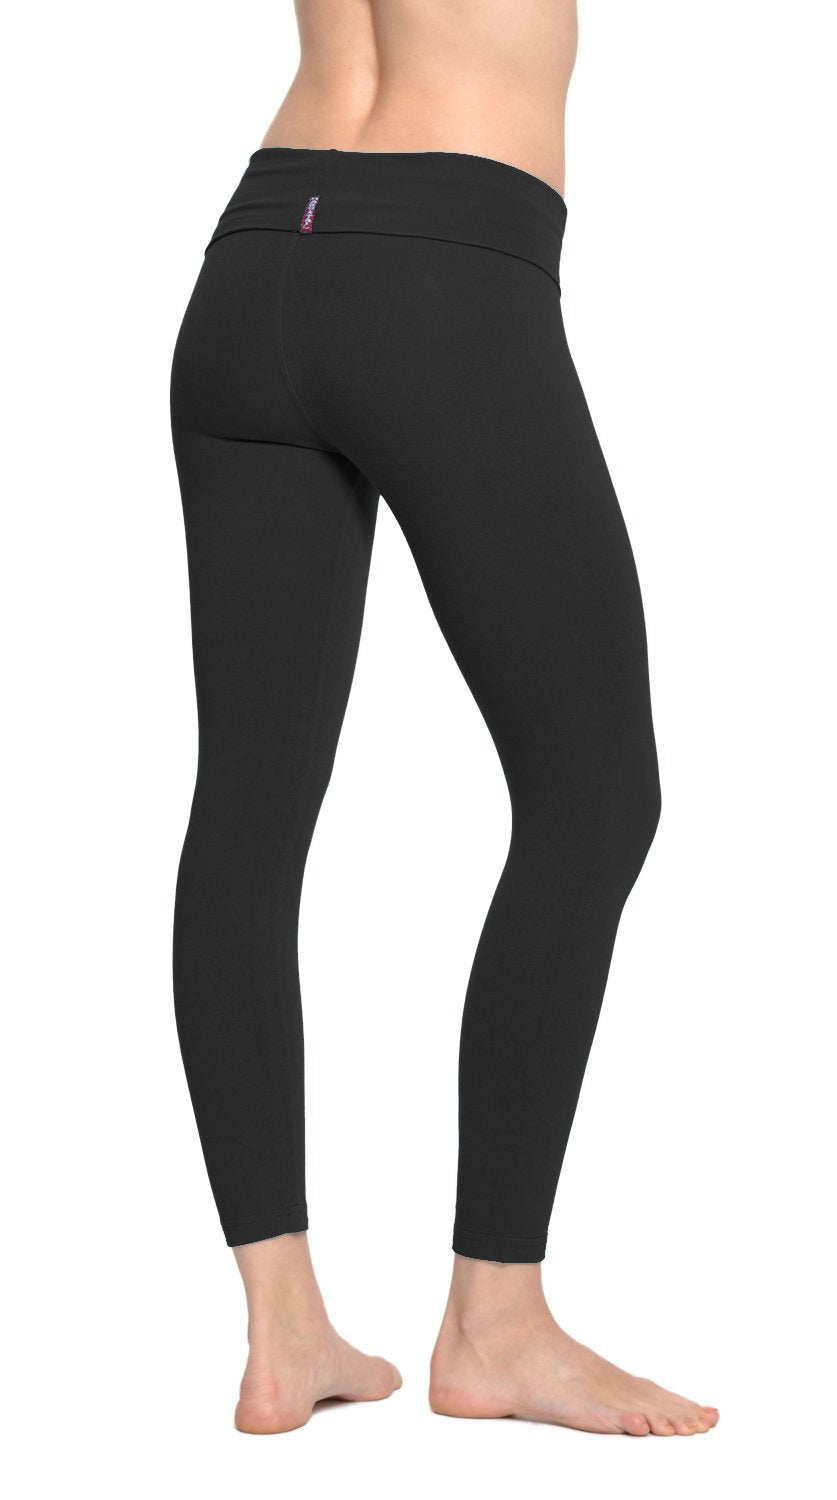 Rolldown Layered Legging (Style 588, Black) by Hard Tail Forever